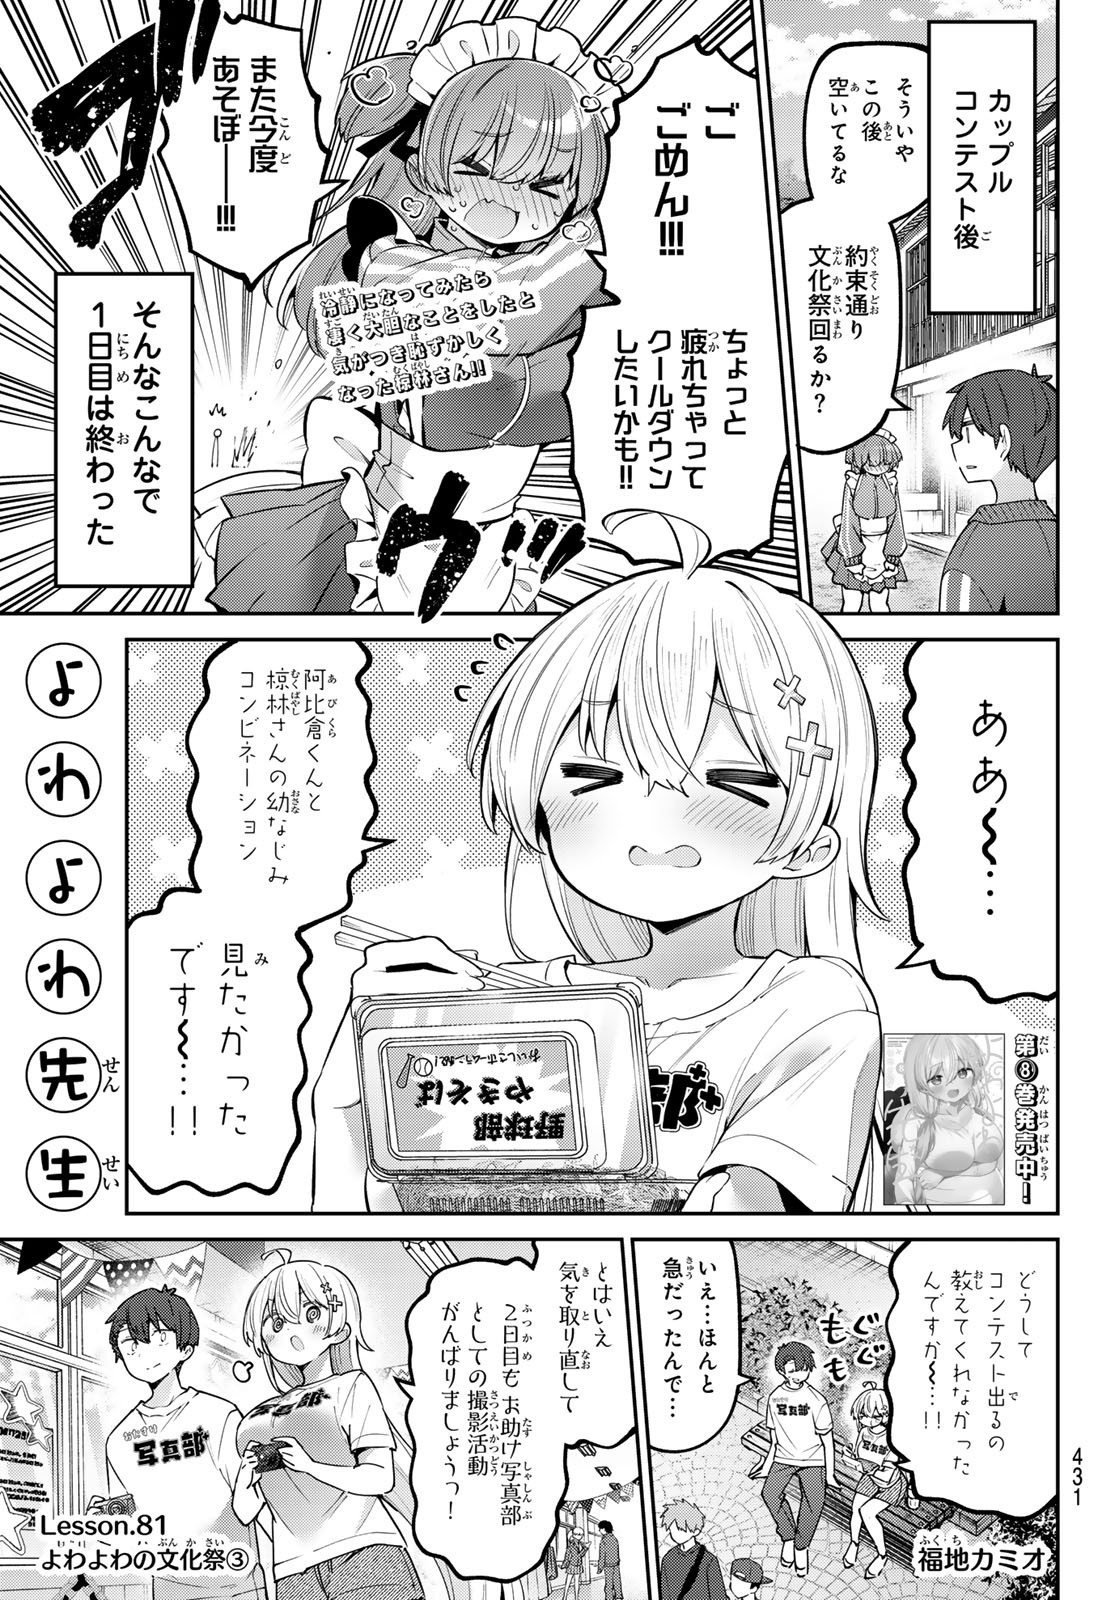 Weekly Shōnen Magazine - 週刊少年マガジン - Chapter 2024-33 - Page 429